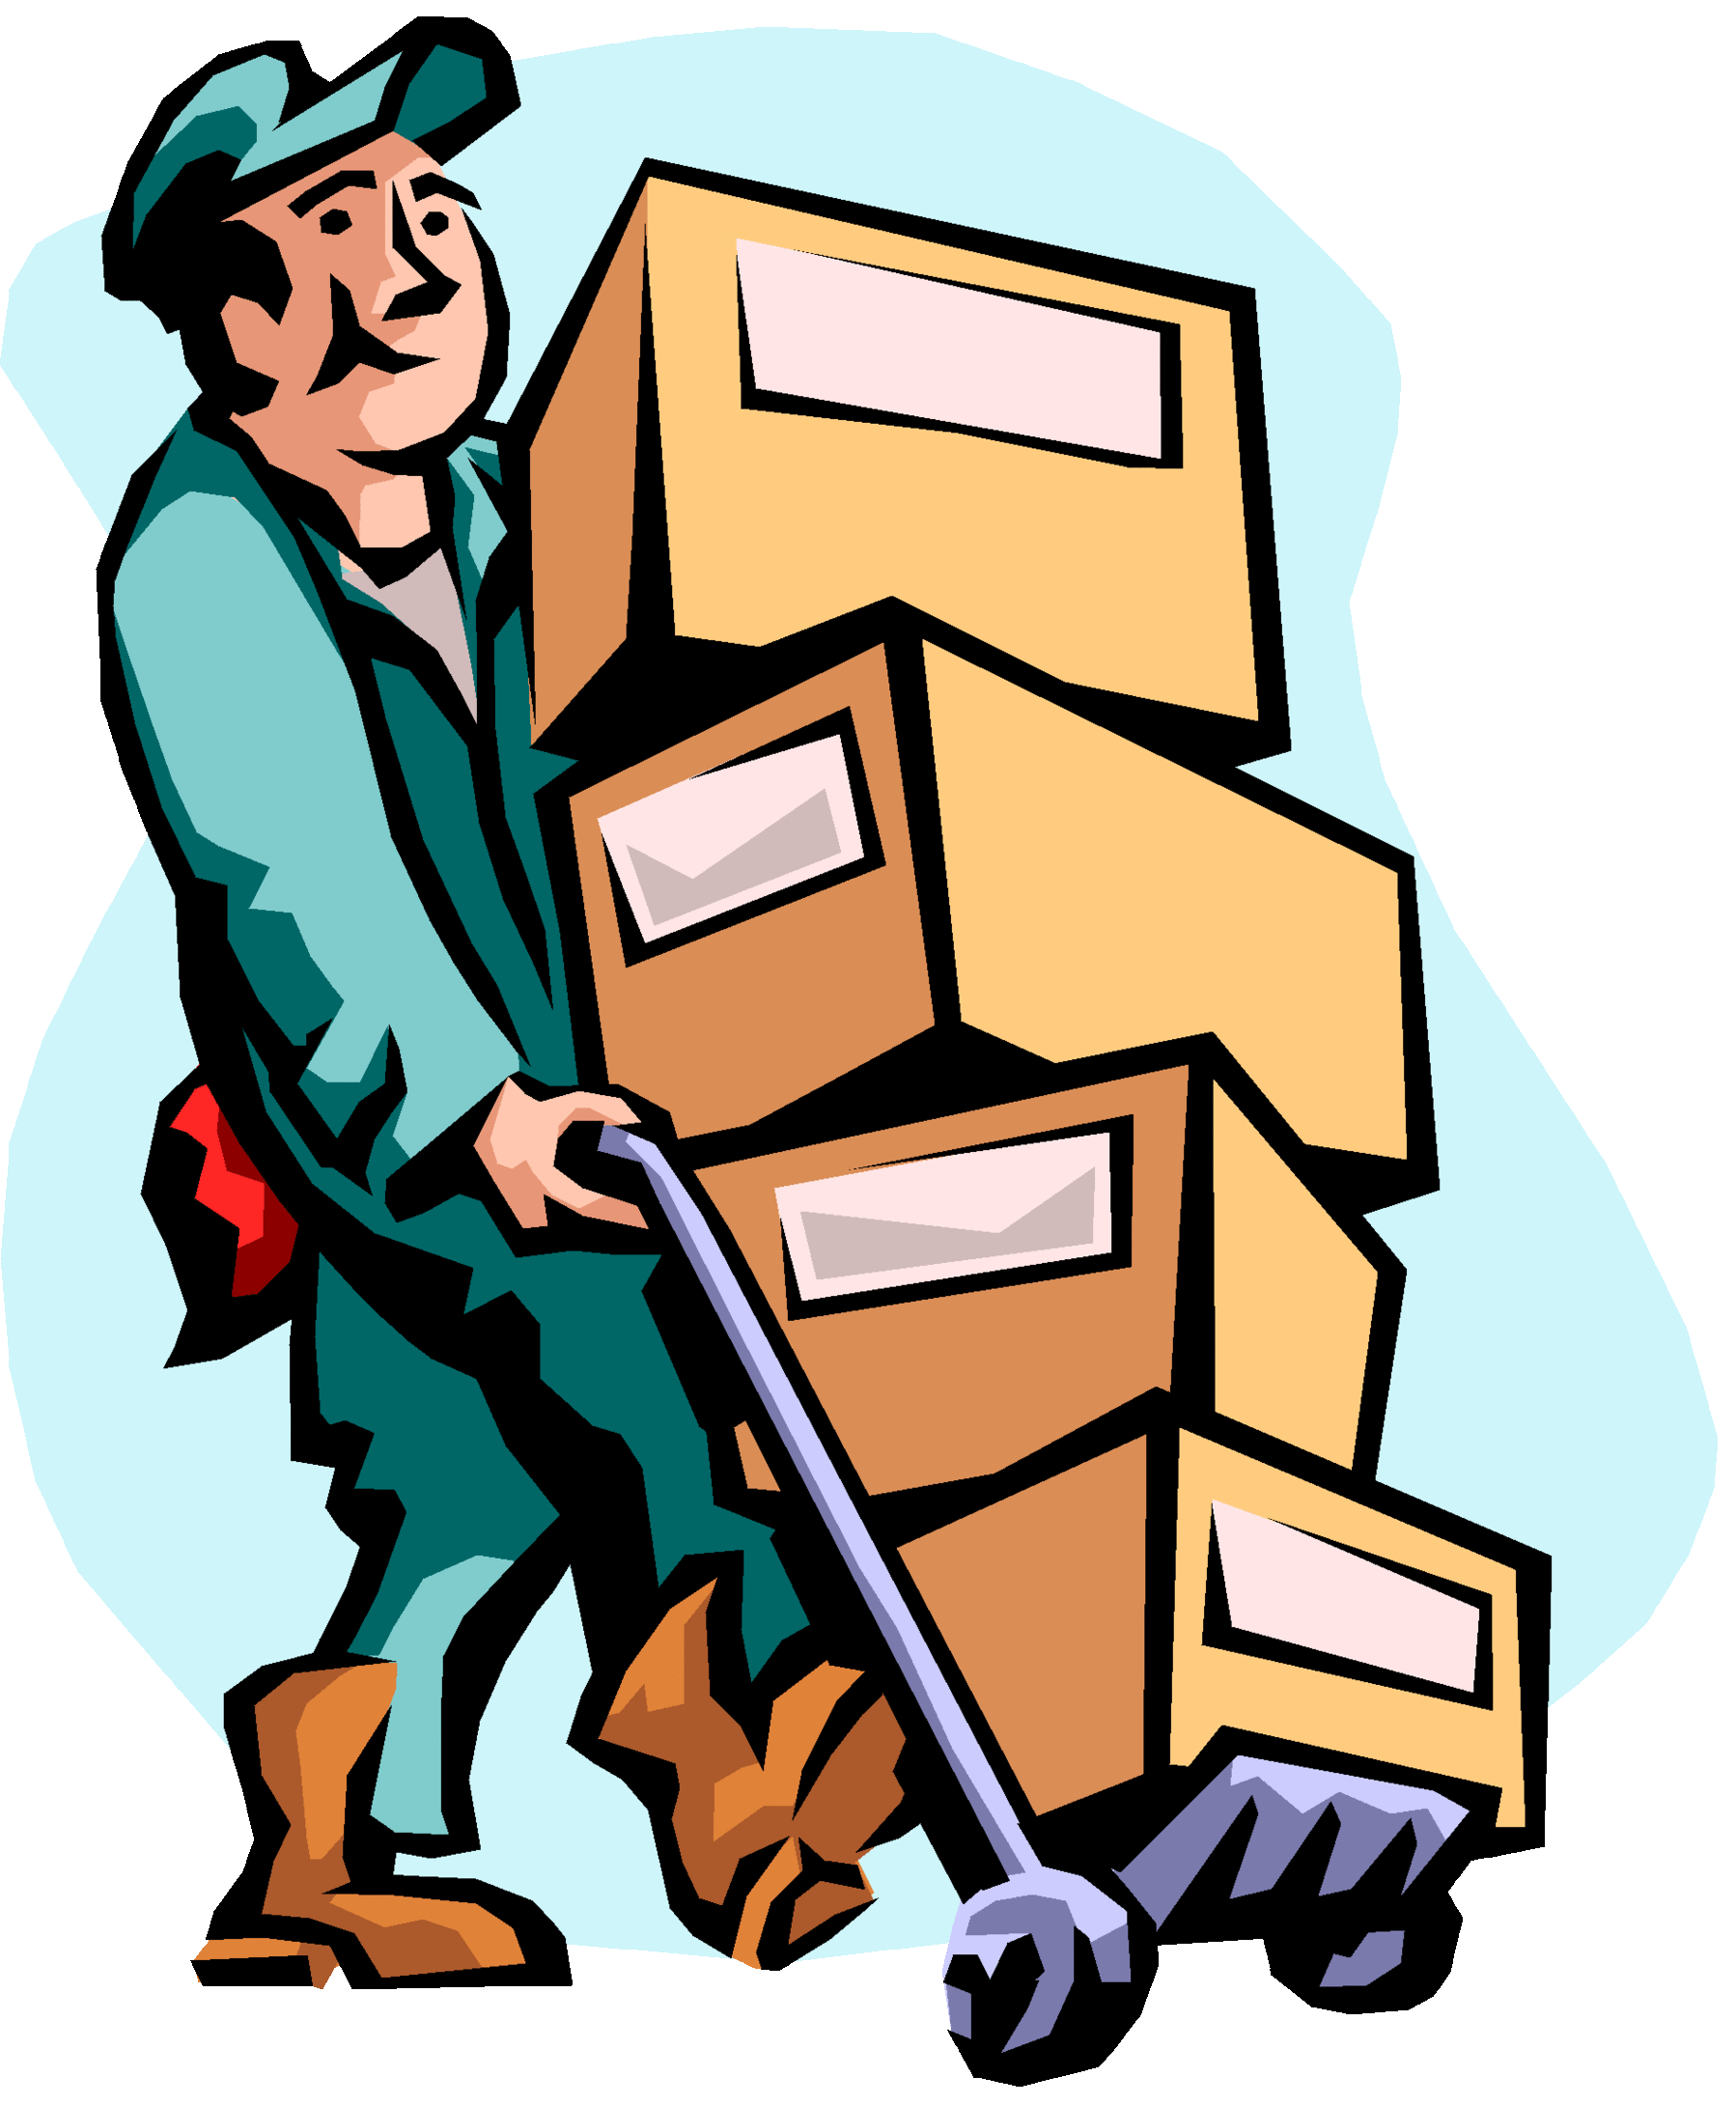 Moving Sale Clip Art Images Free Clipart - Free to use Clip Art ...